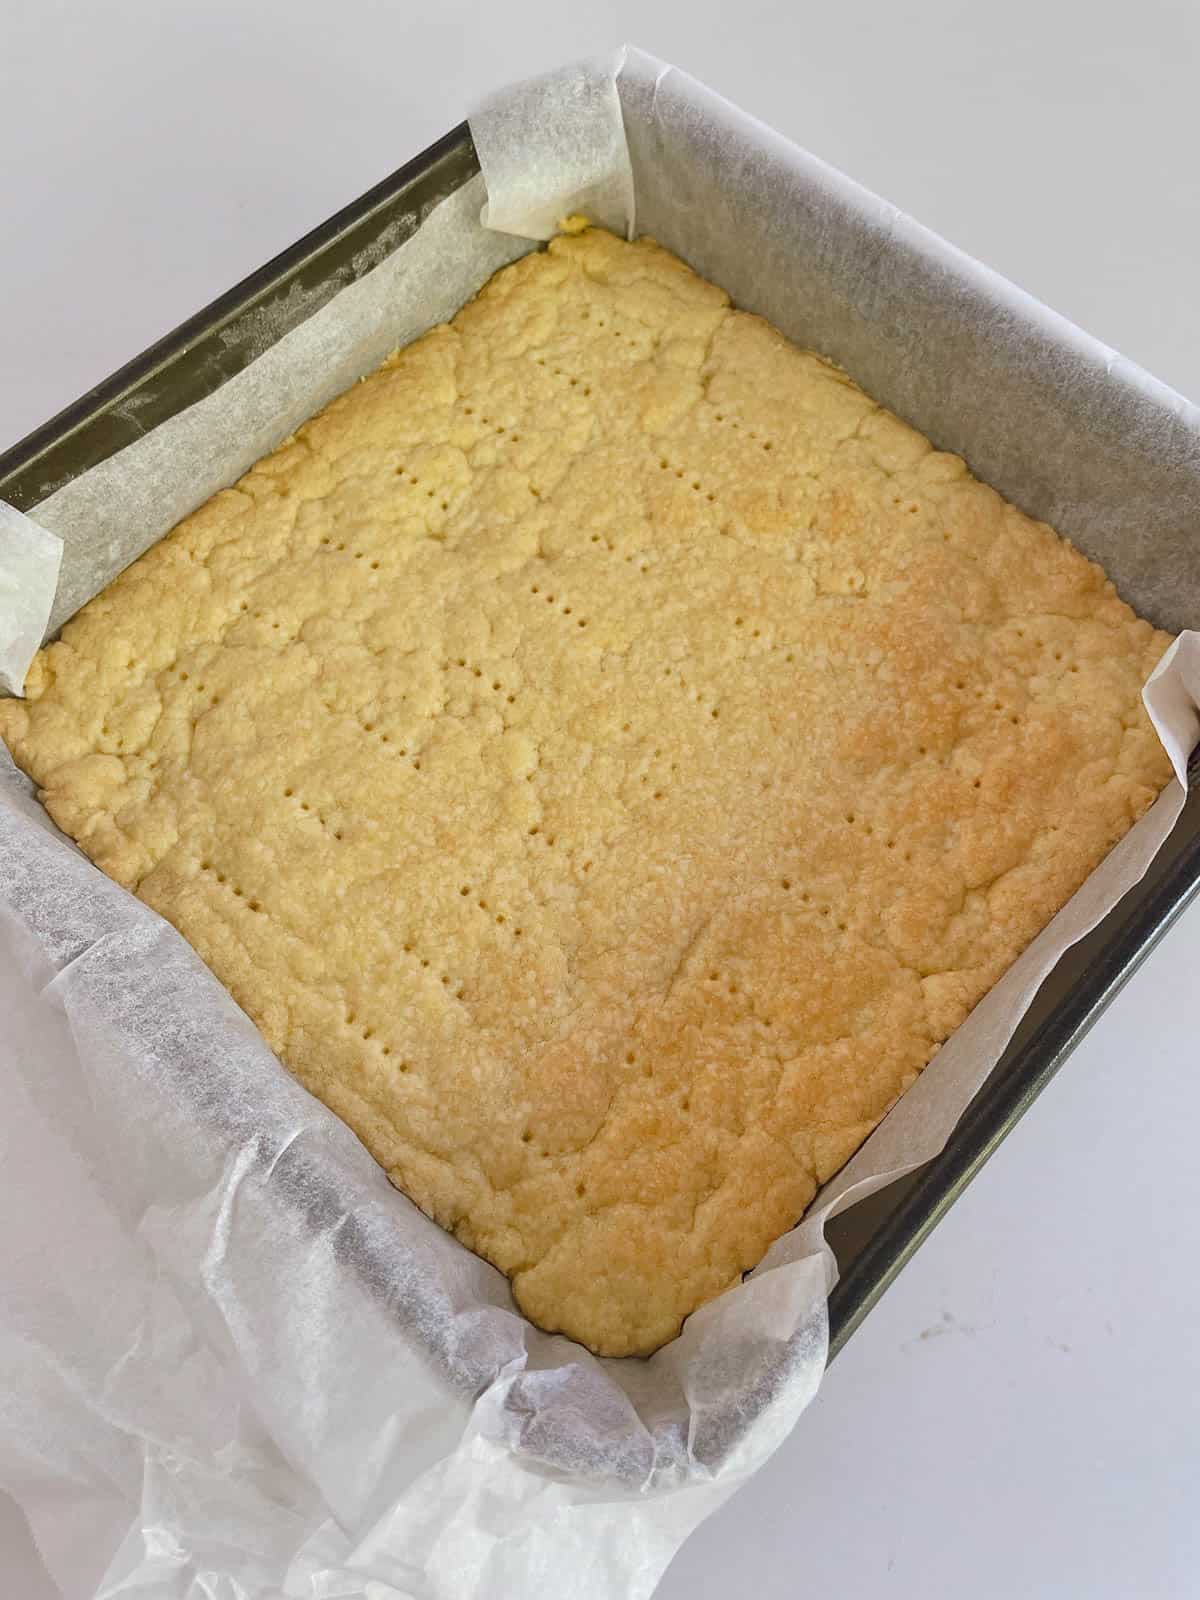 Baked shortbread fresh from the oven.